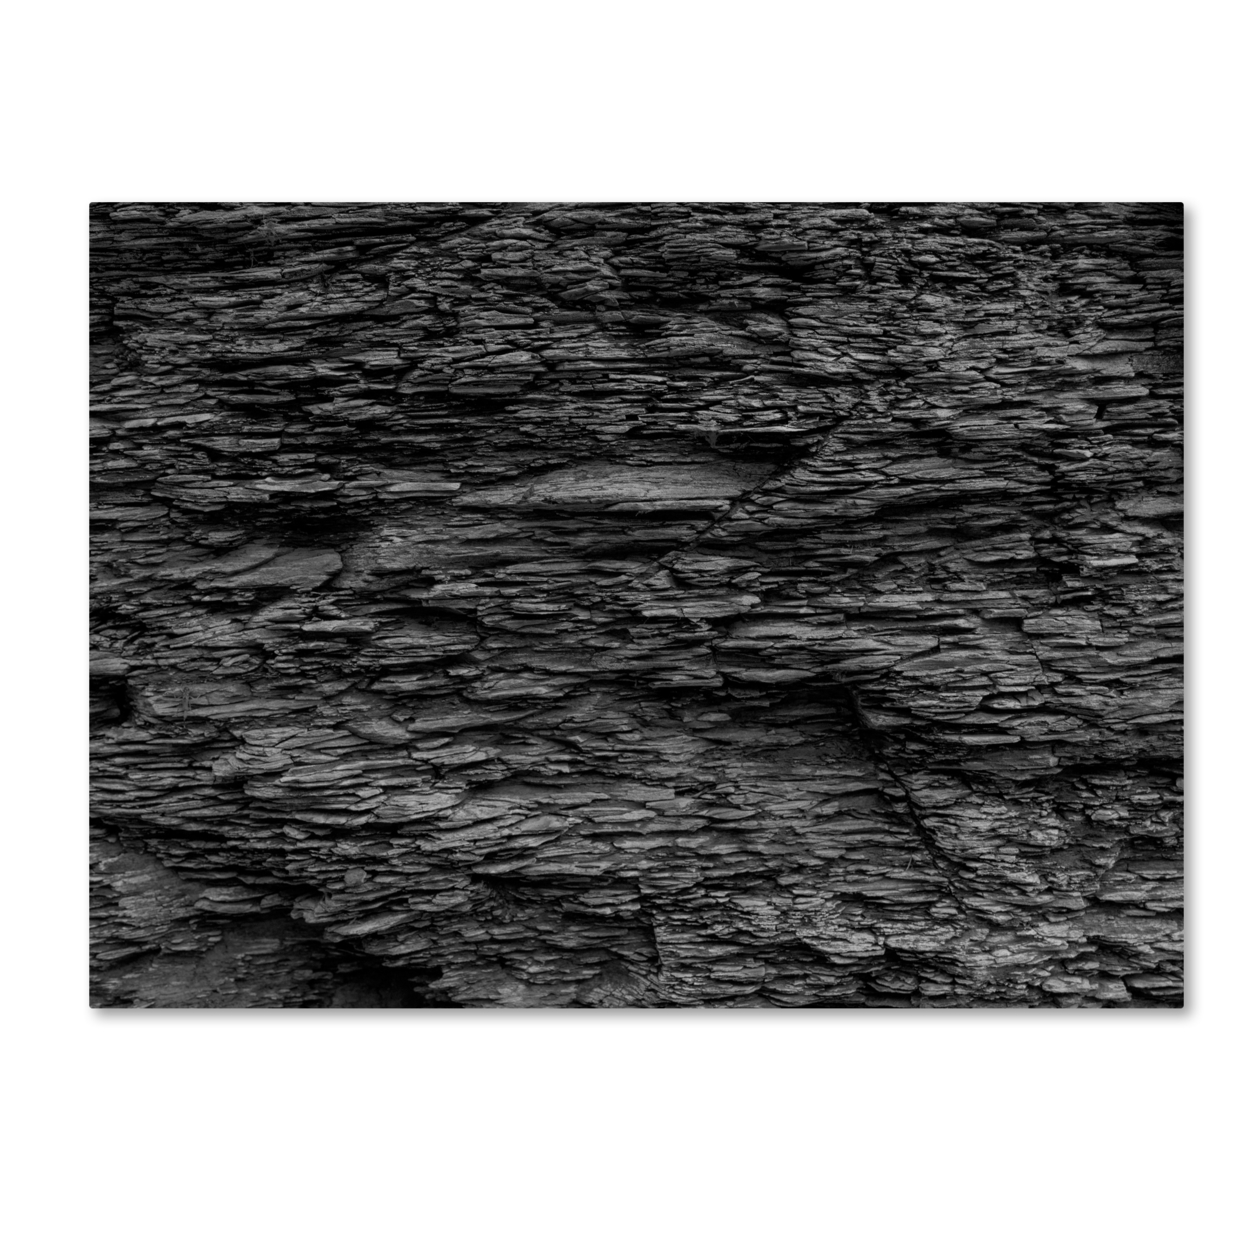 Kurt Shaffer 'Shale Abstract In Black And White' Canvas Wall Art 35 X 47 Inches